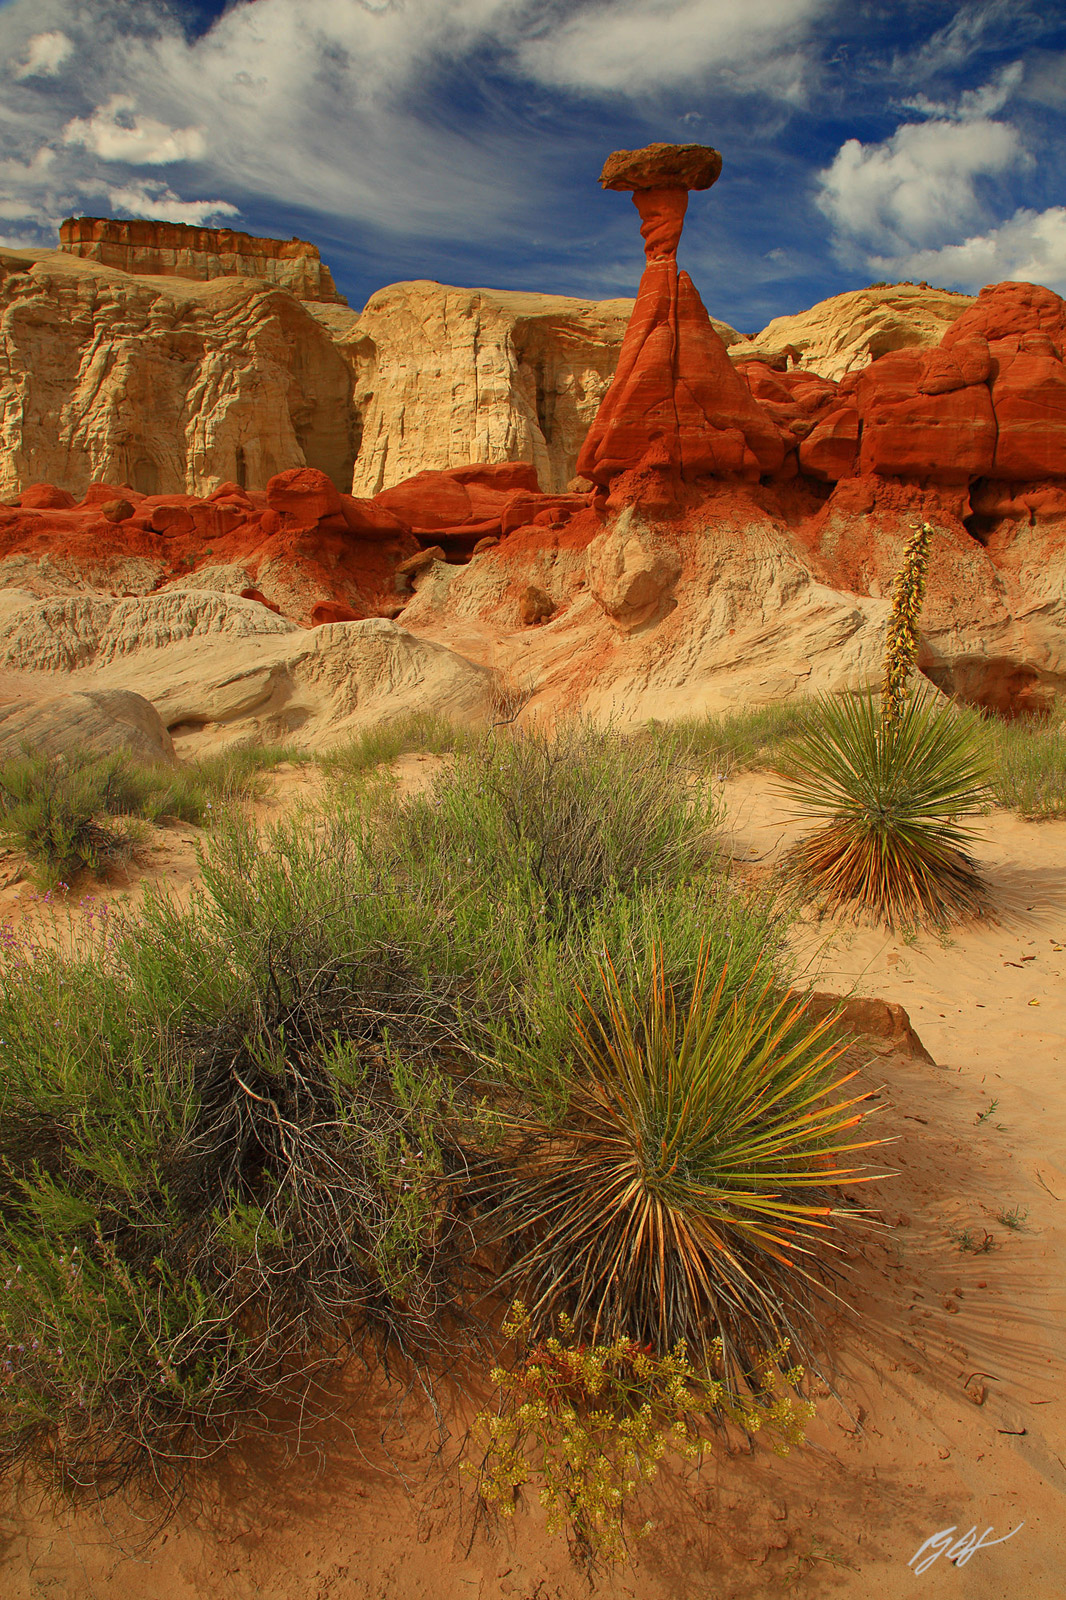 Rim Rock Toadstool Hoodoos in the Vermillion Cliffs area of Grand Staircase-Escalante National Monument in Utah